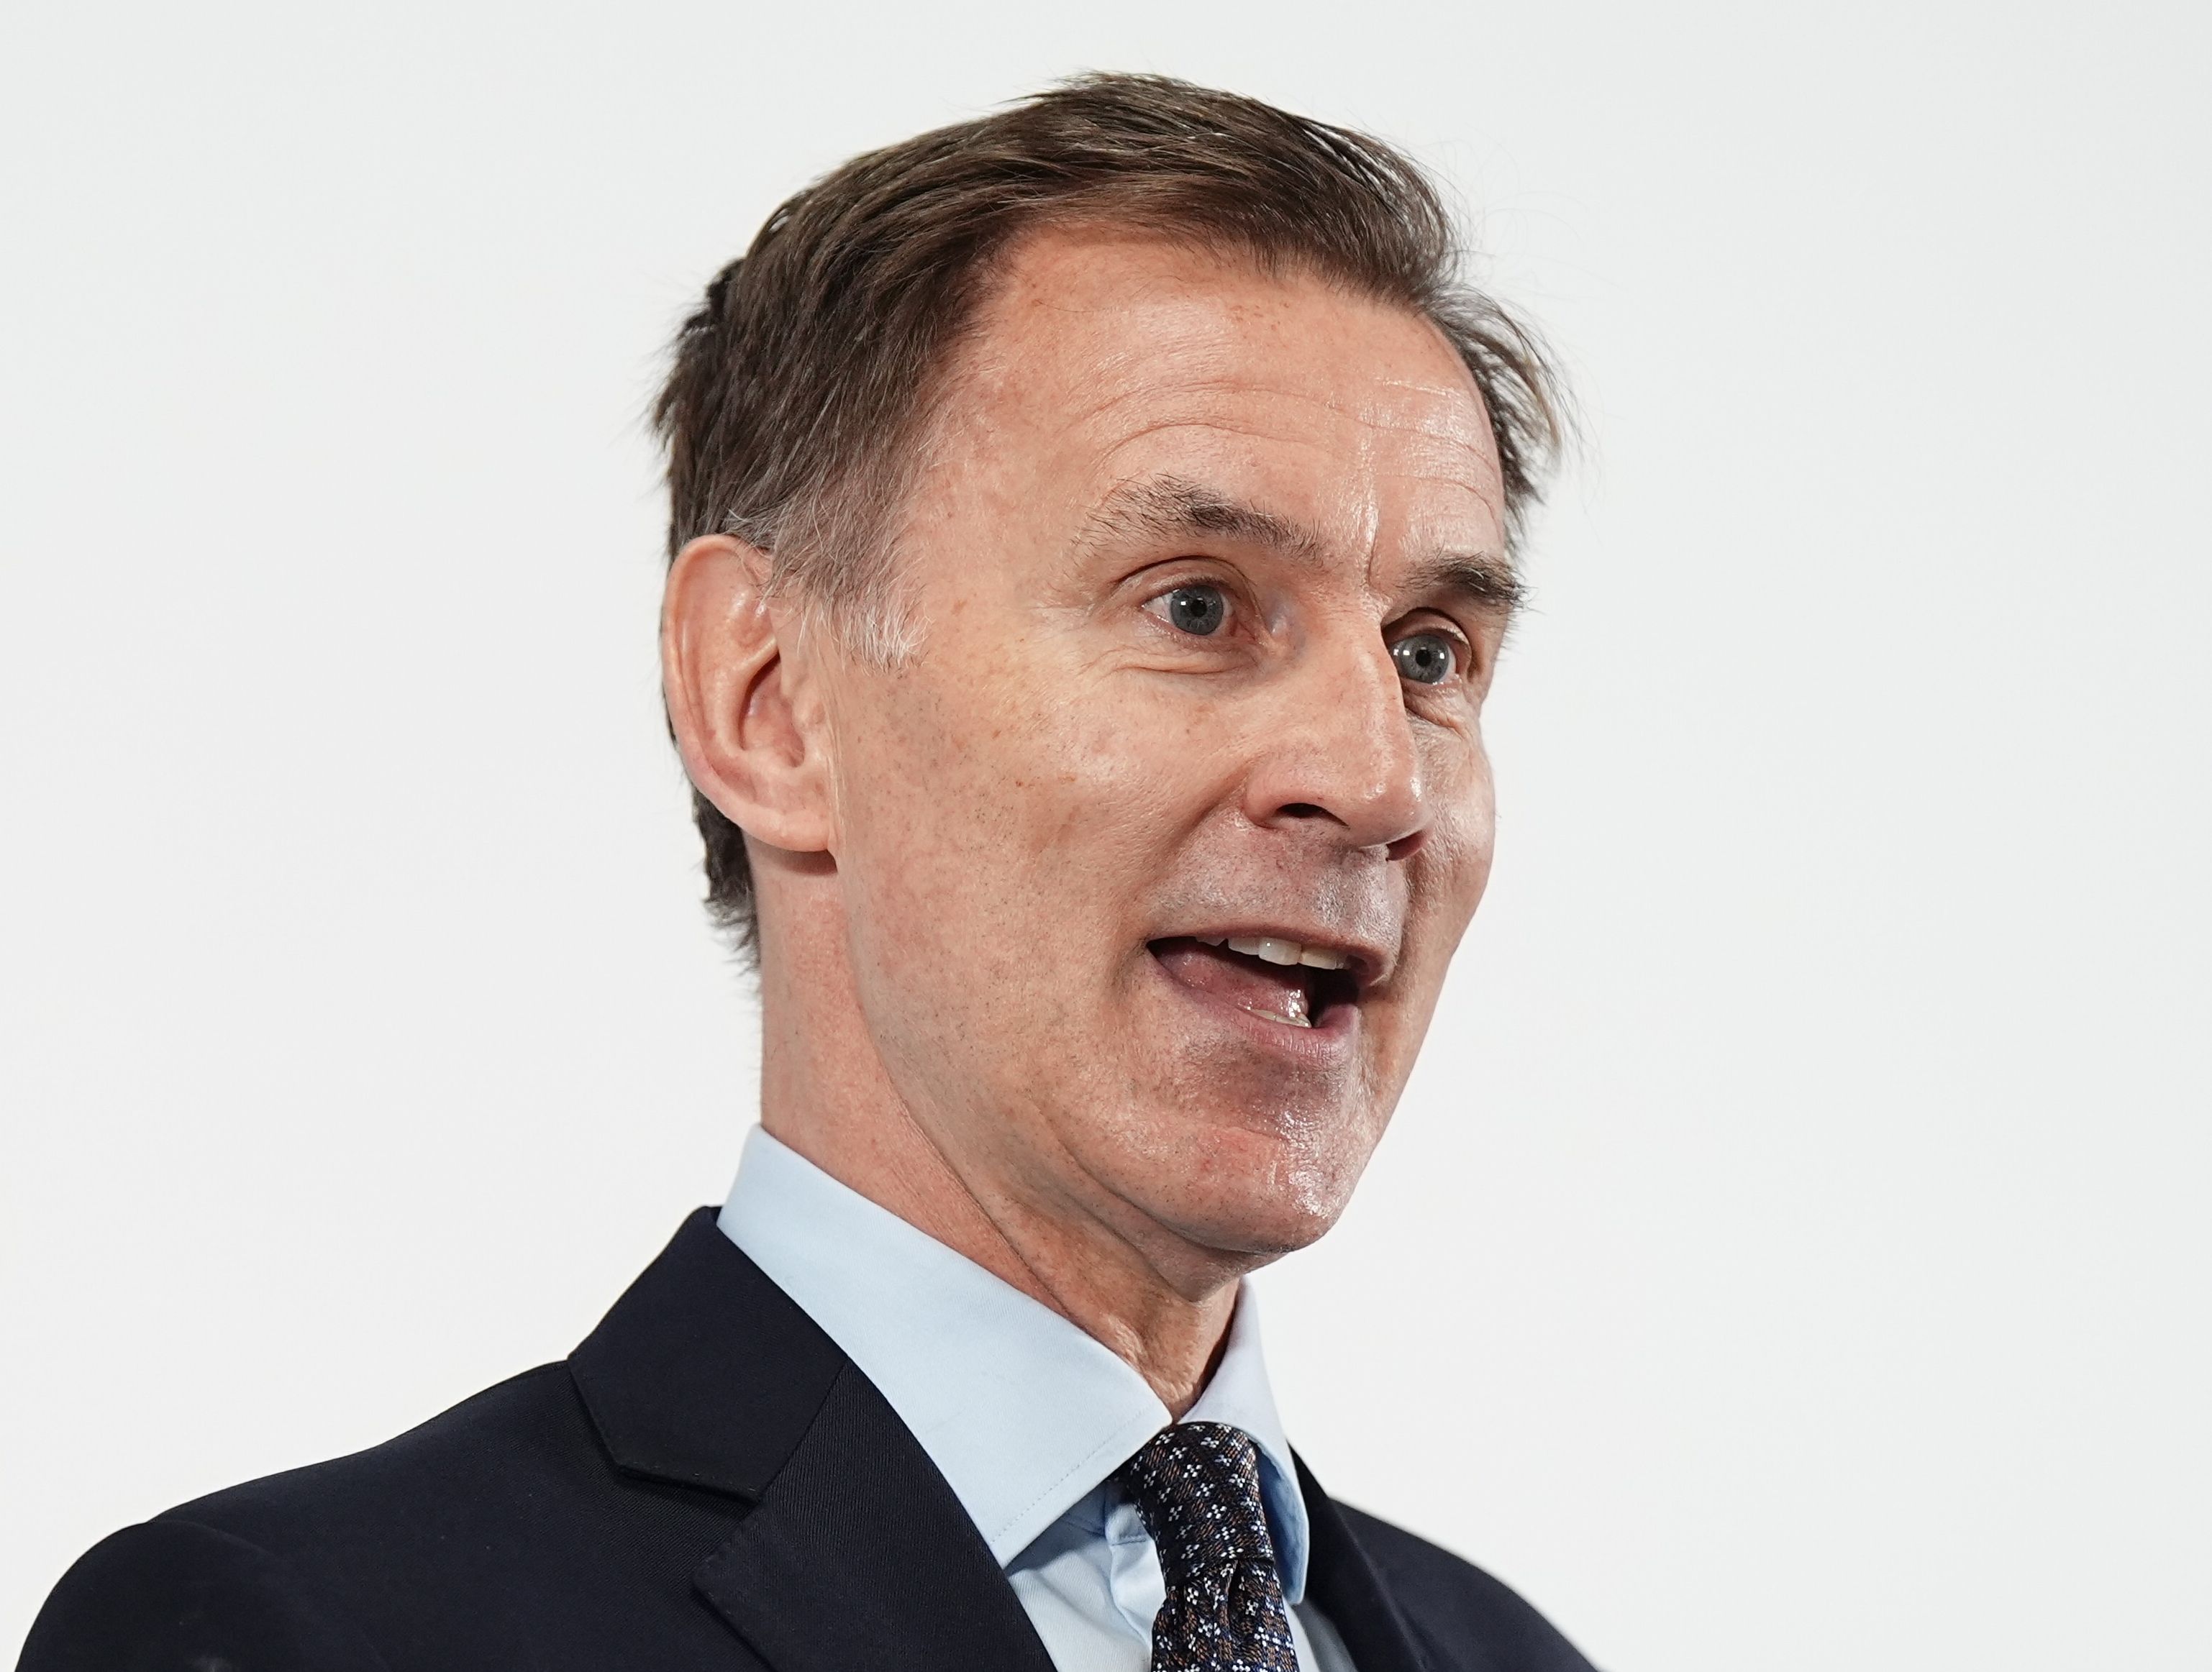 Chancellor Jeremy Hunt speaks in photo from recent speech